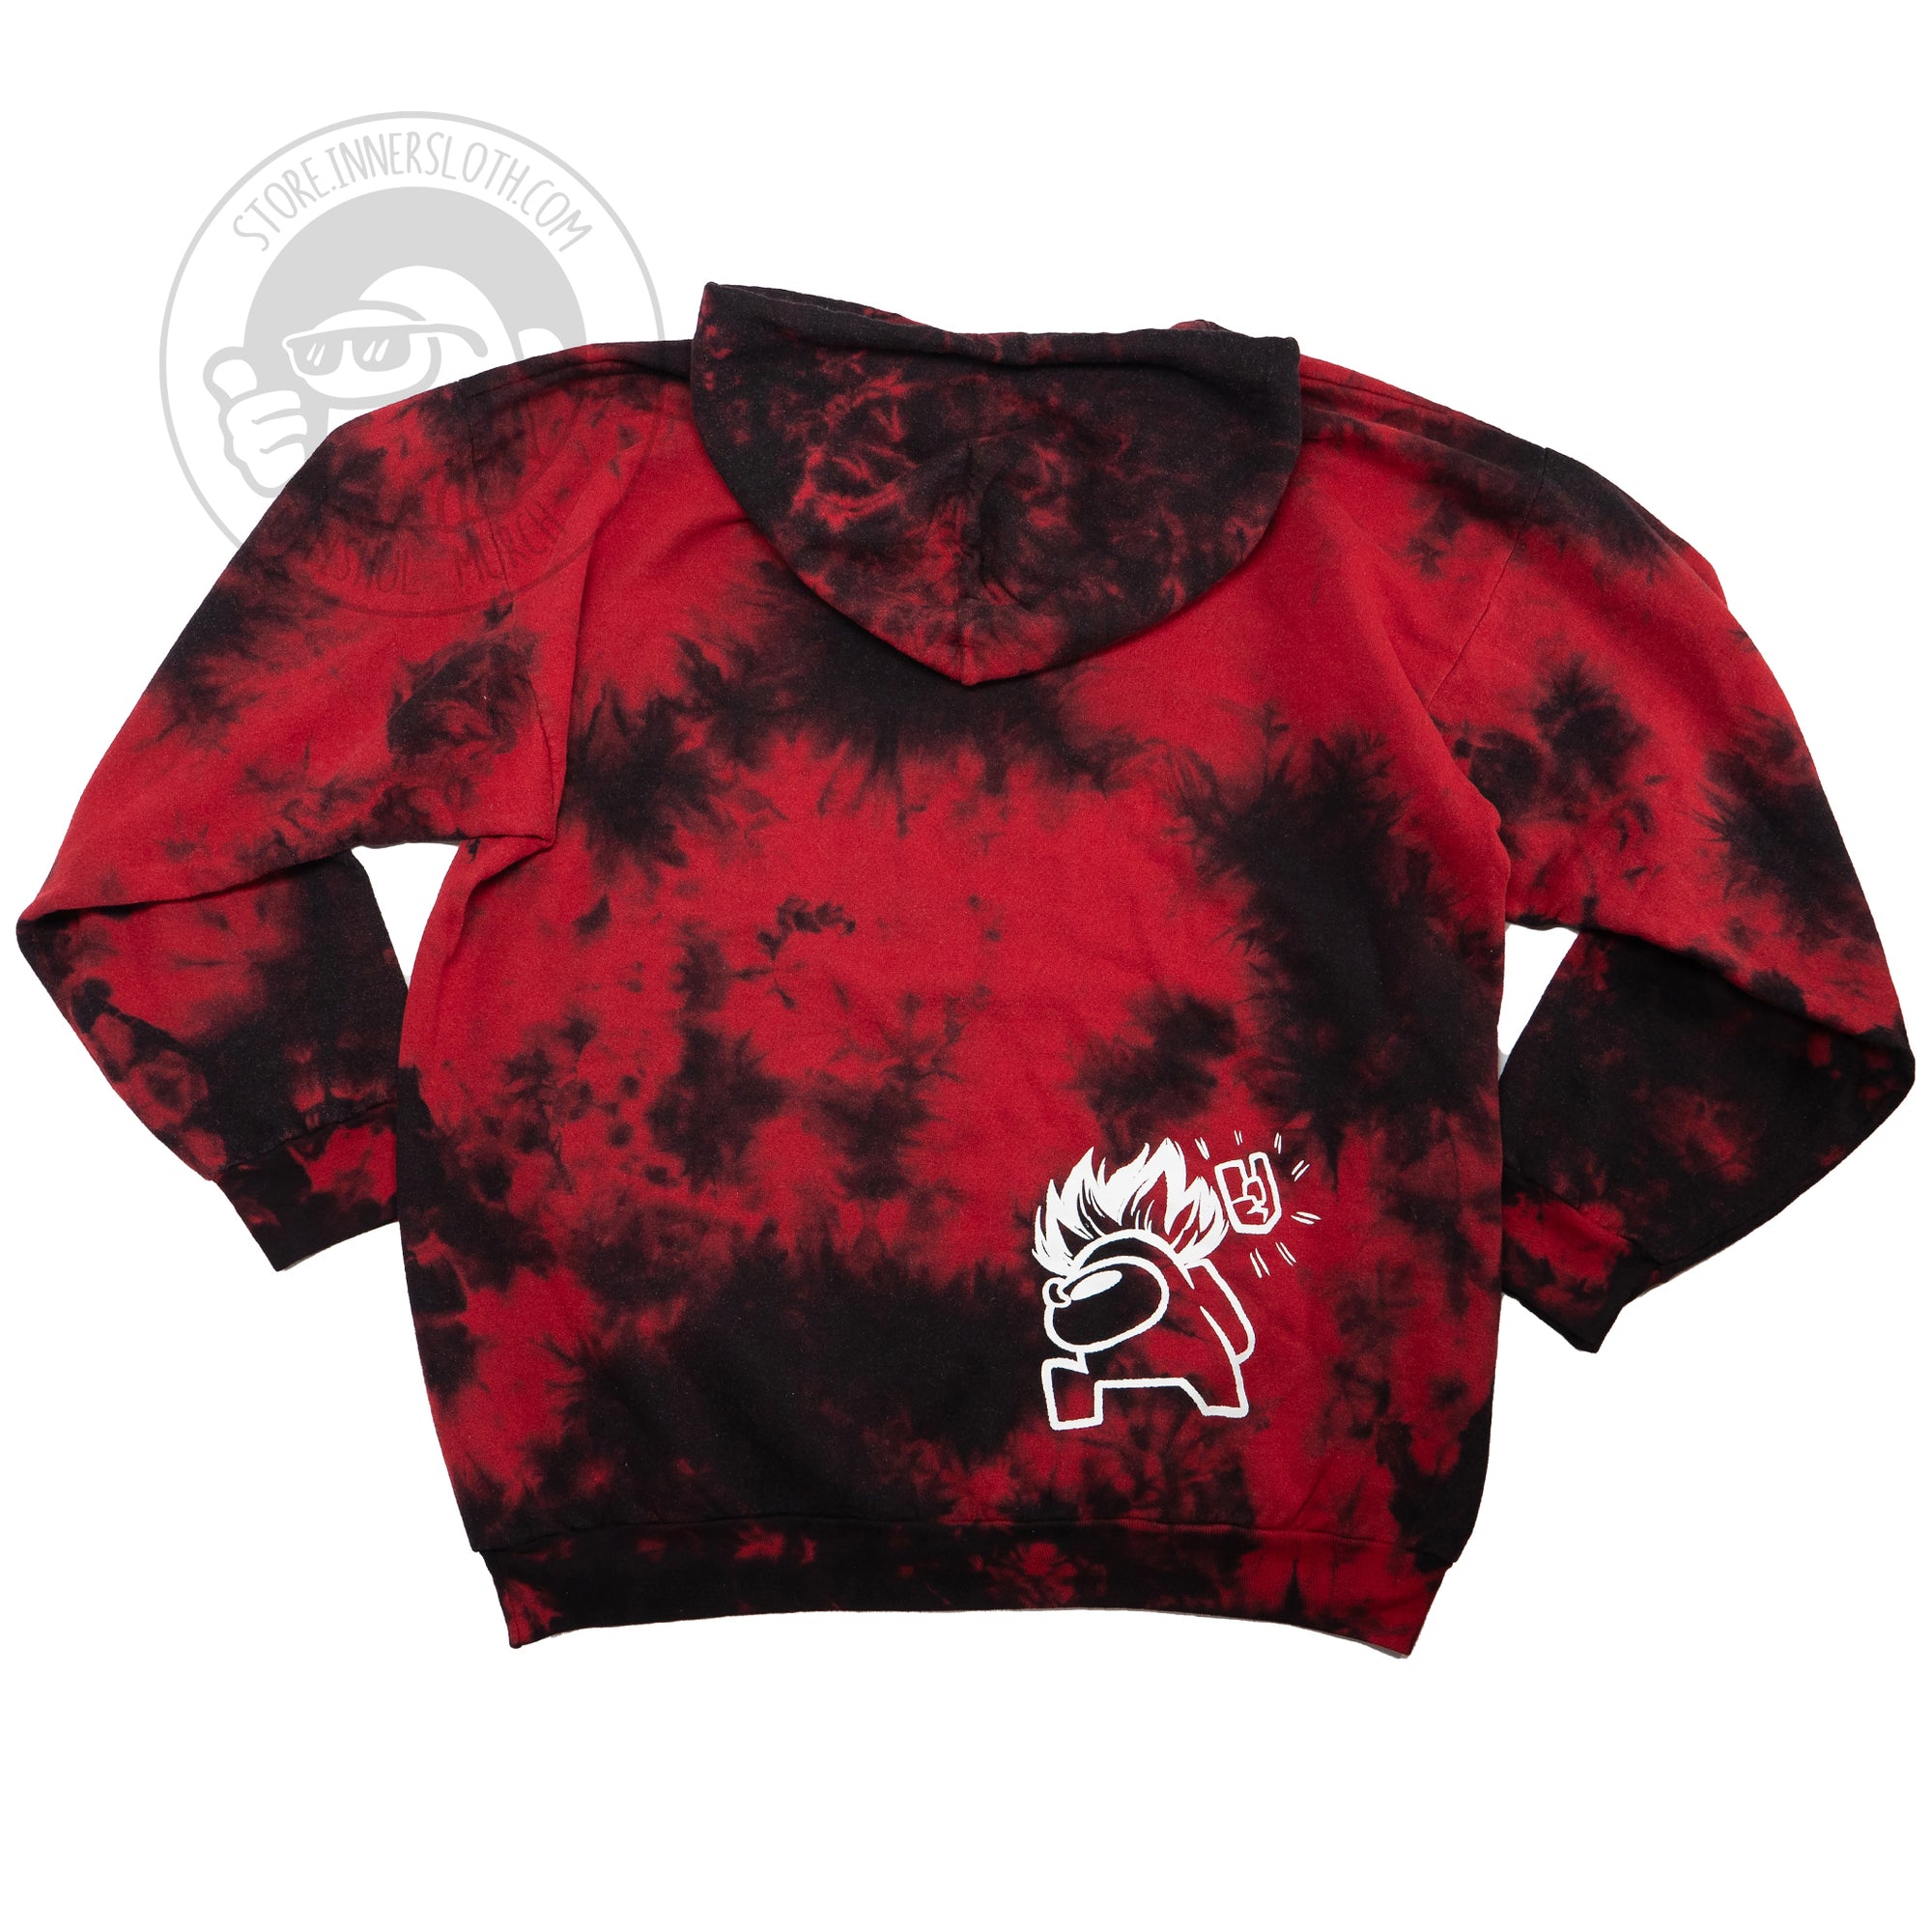 A flat lay photograph of the front of the Metal Red Pullover hoodie on a white background. The garment base is a patchy red and black tie-dye with the words “Among Us” screenprinted in a metal music-esque font across the front in white ink. 